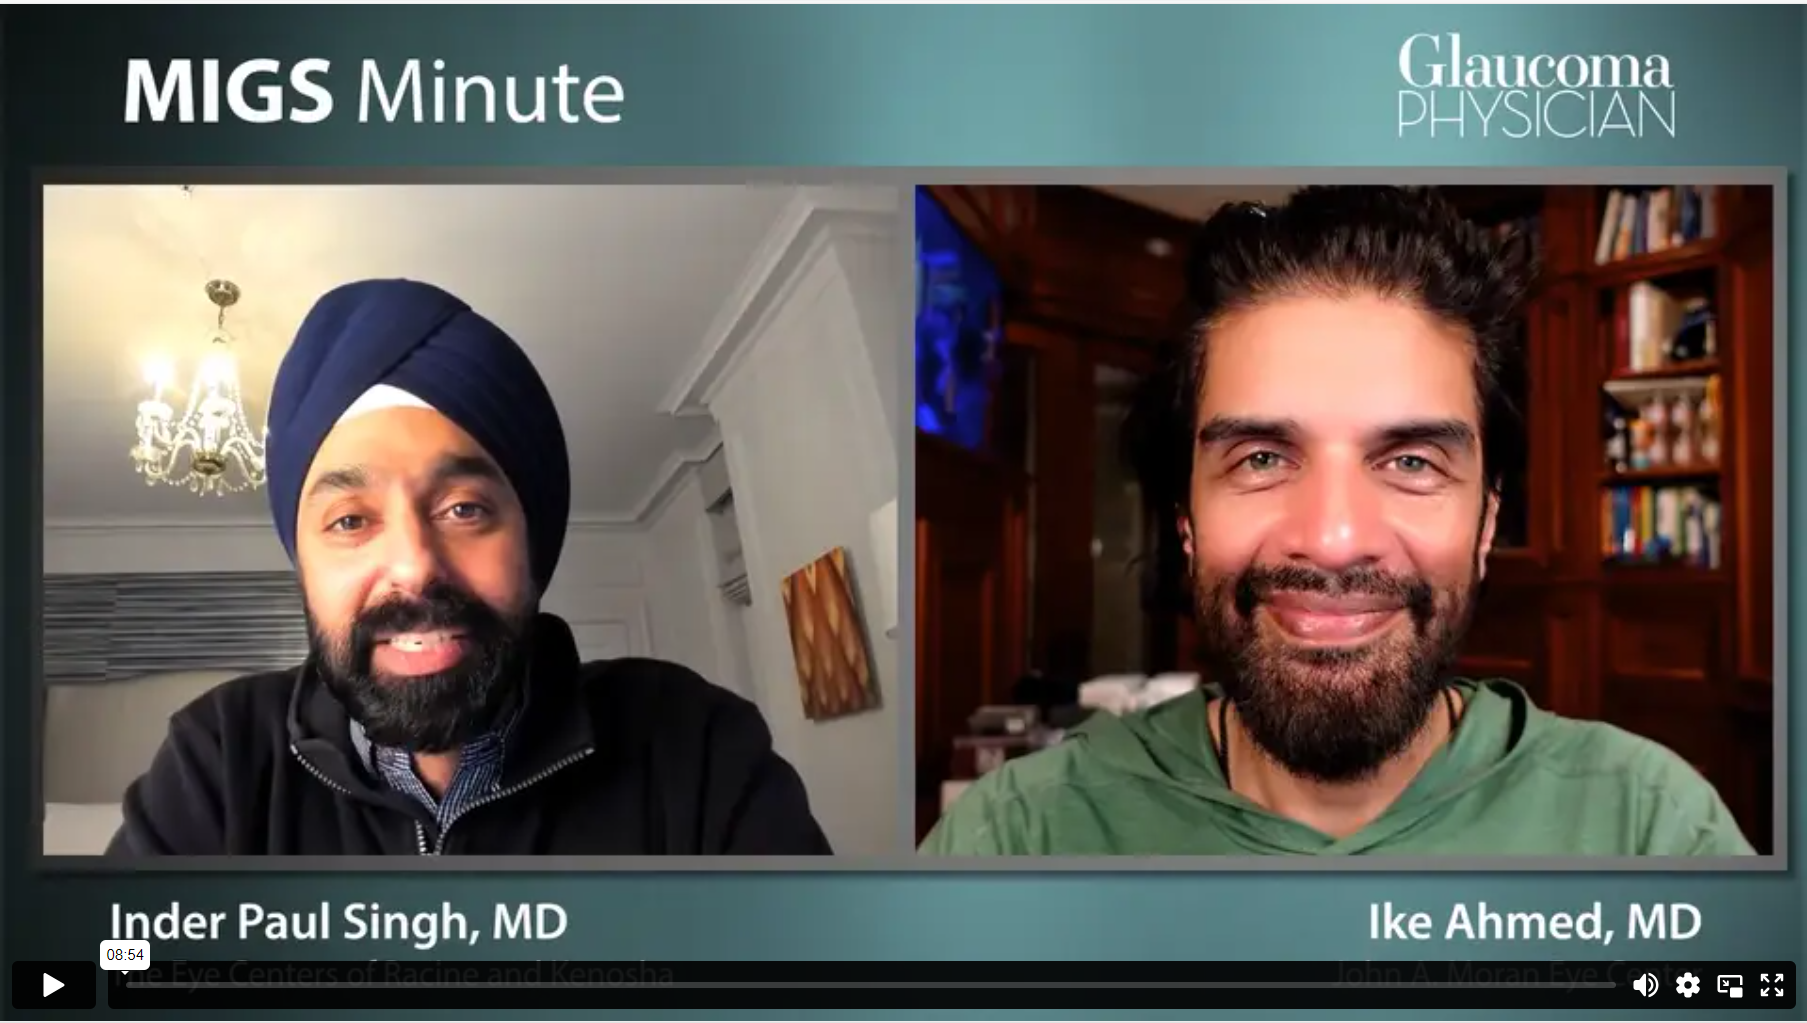 Episode 3: Inder Paul Singh, MD and Ike Ahmed, MD discuss the use of MIGS in advanced cases of glaucoma.